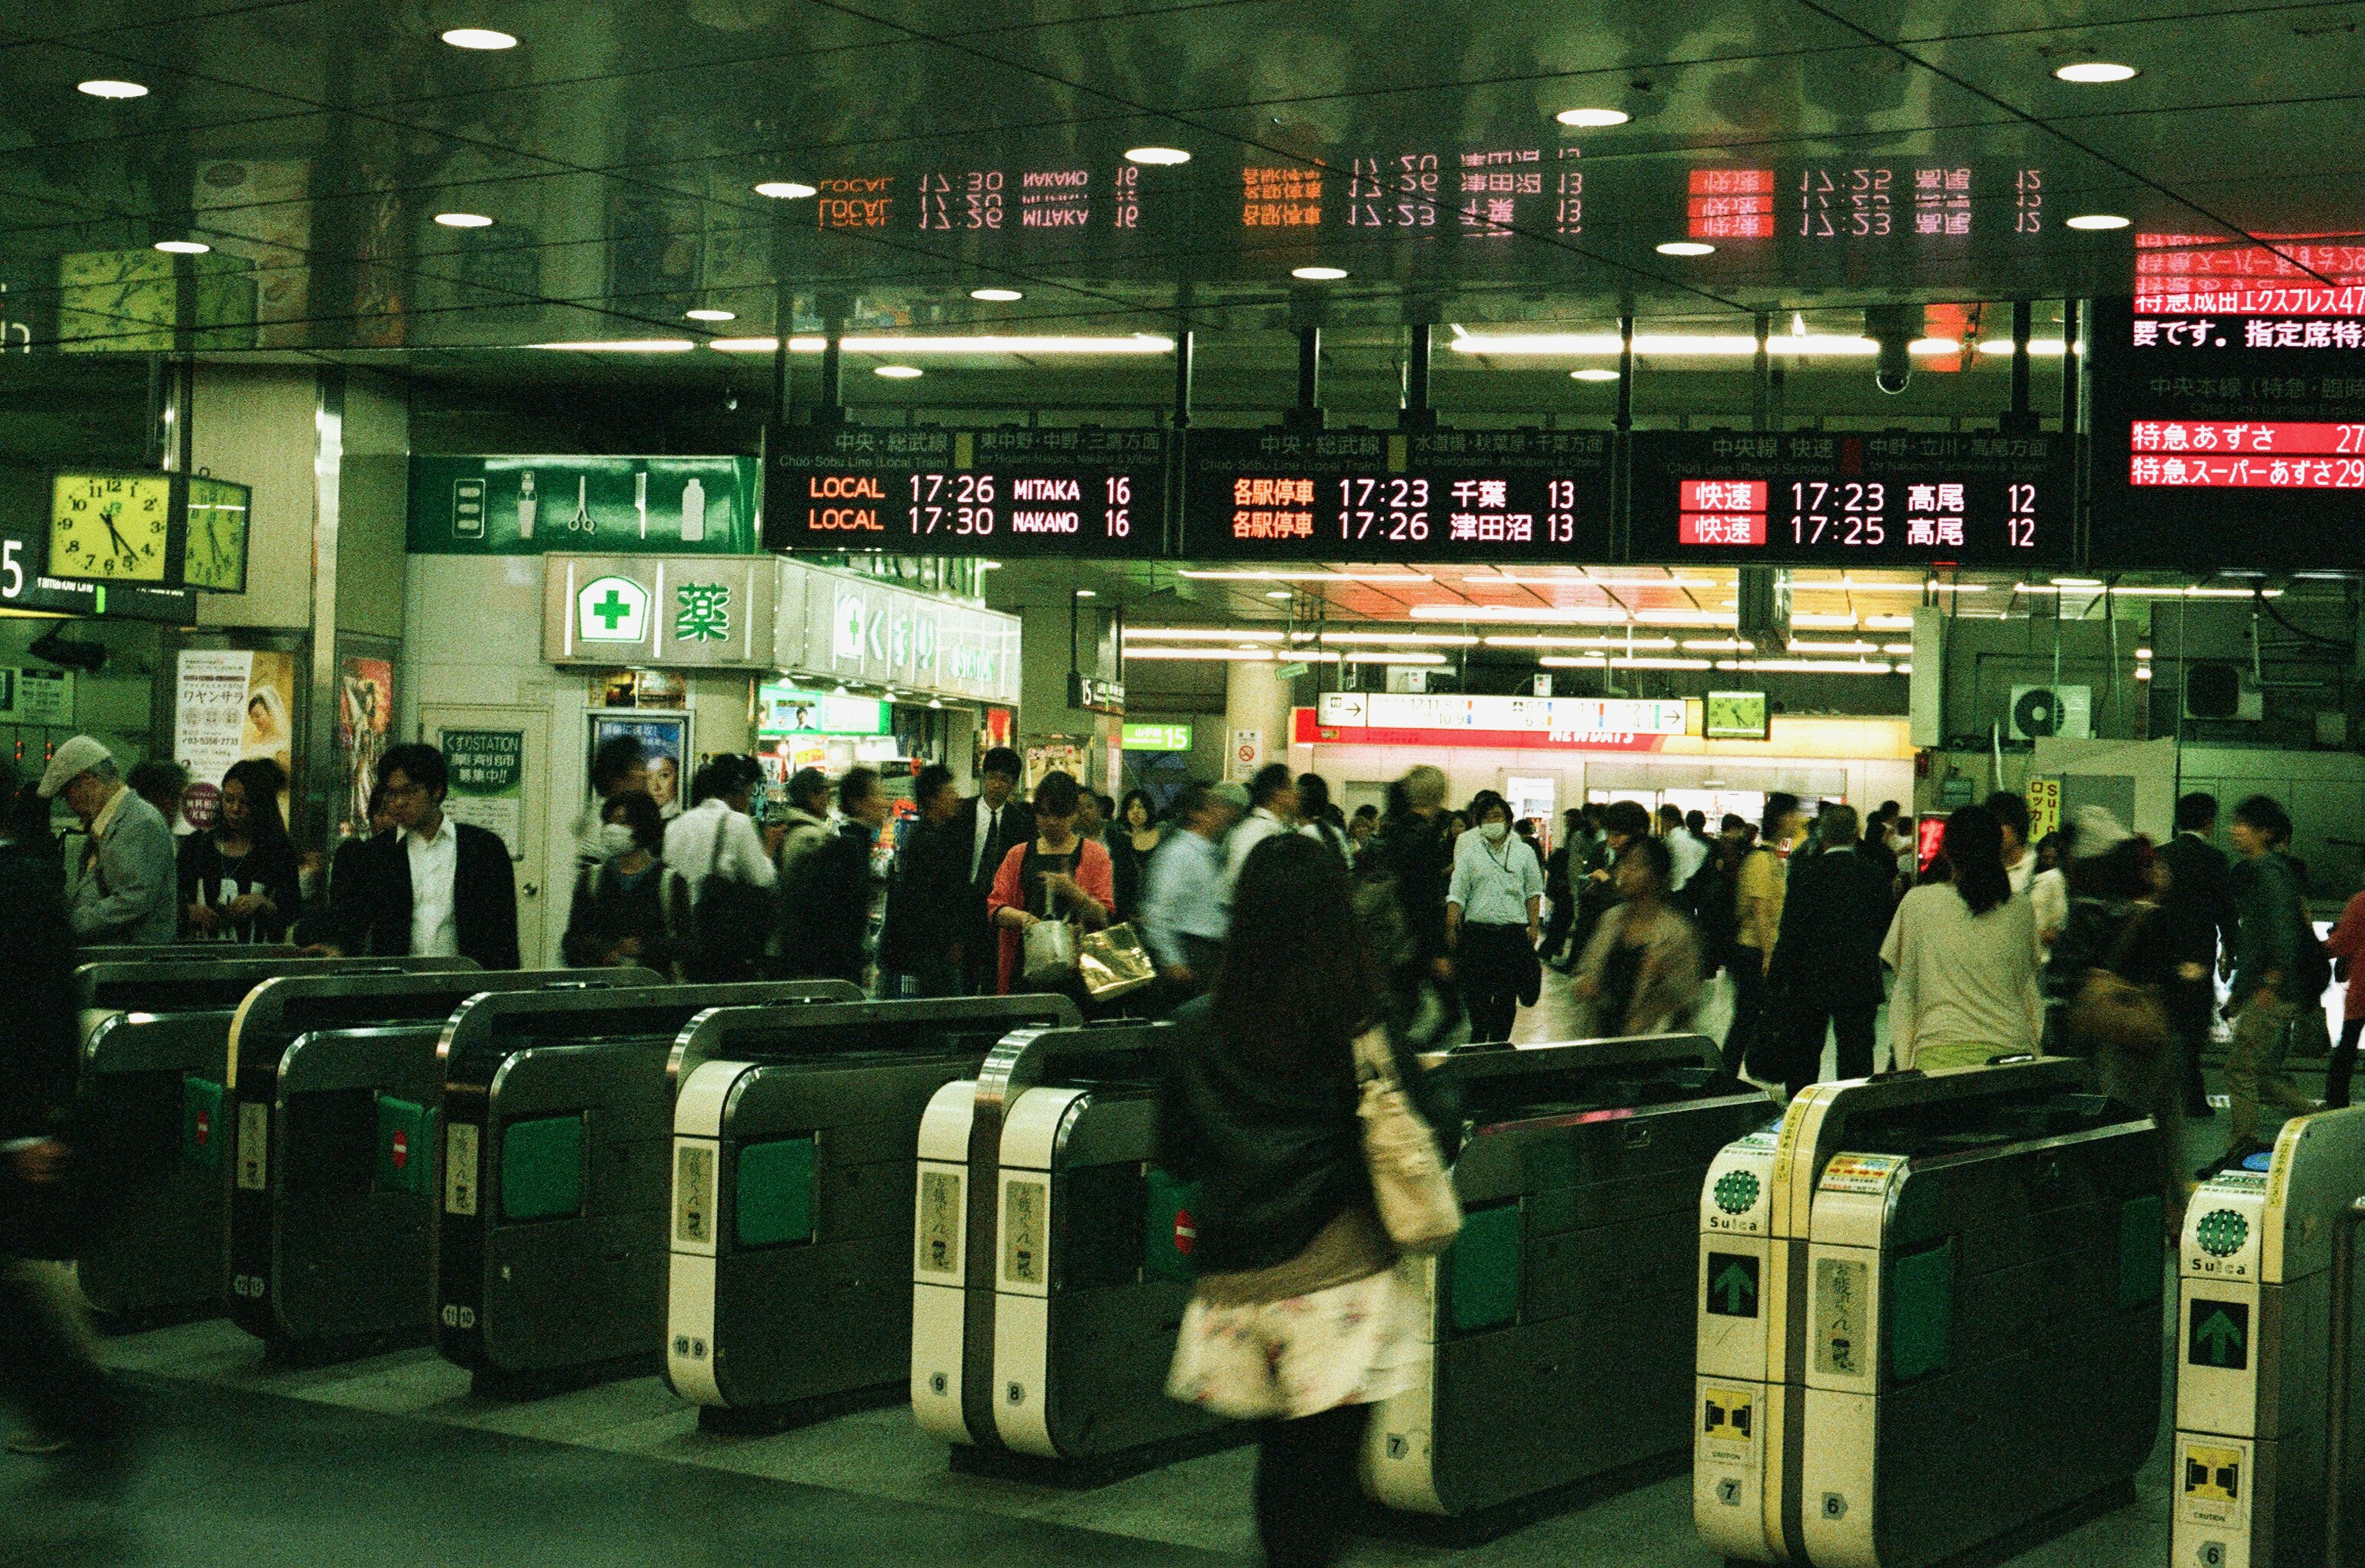 A crowd of people are going through the turnstile at Tokyo metro